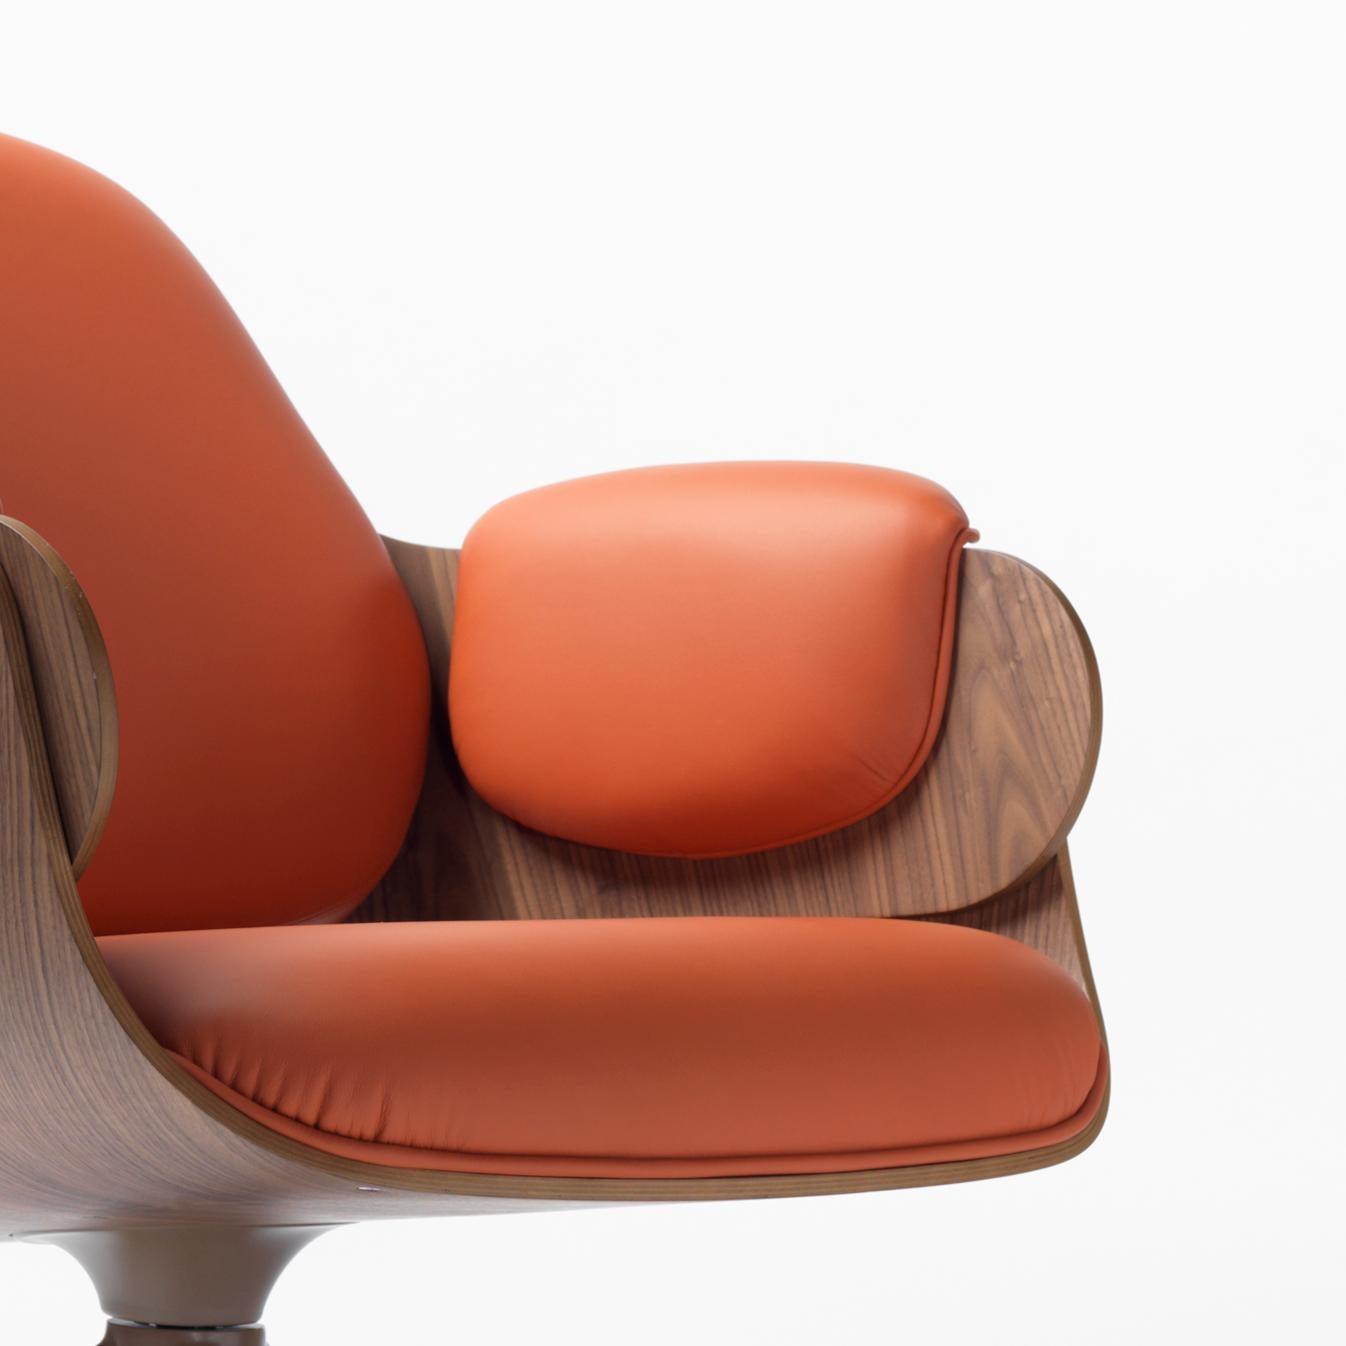 Spanish Jaime Hayon, Contemporary, Plywood Orange Leather Low Lounger Armchair